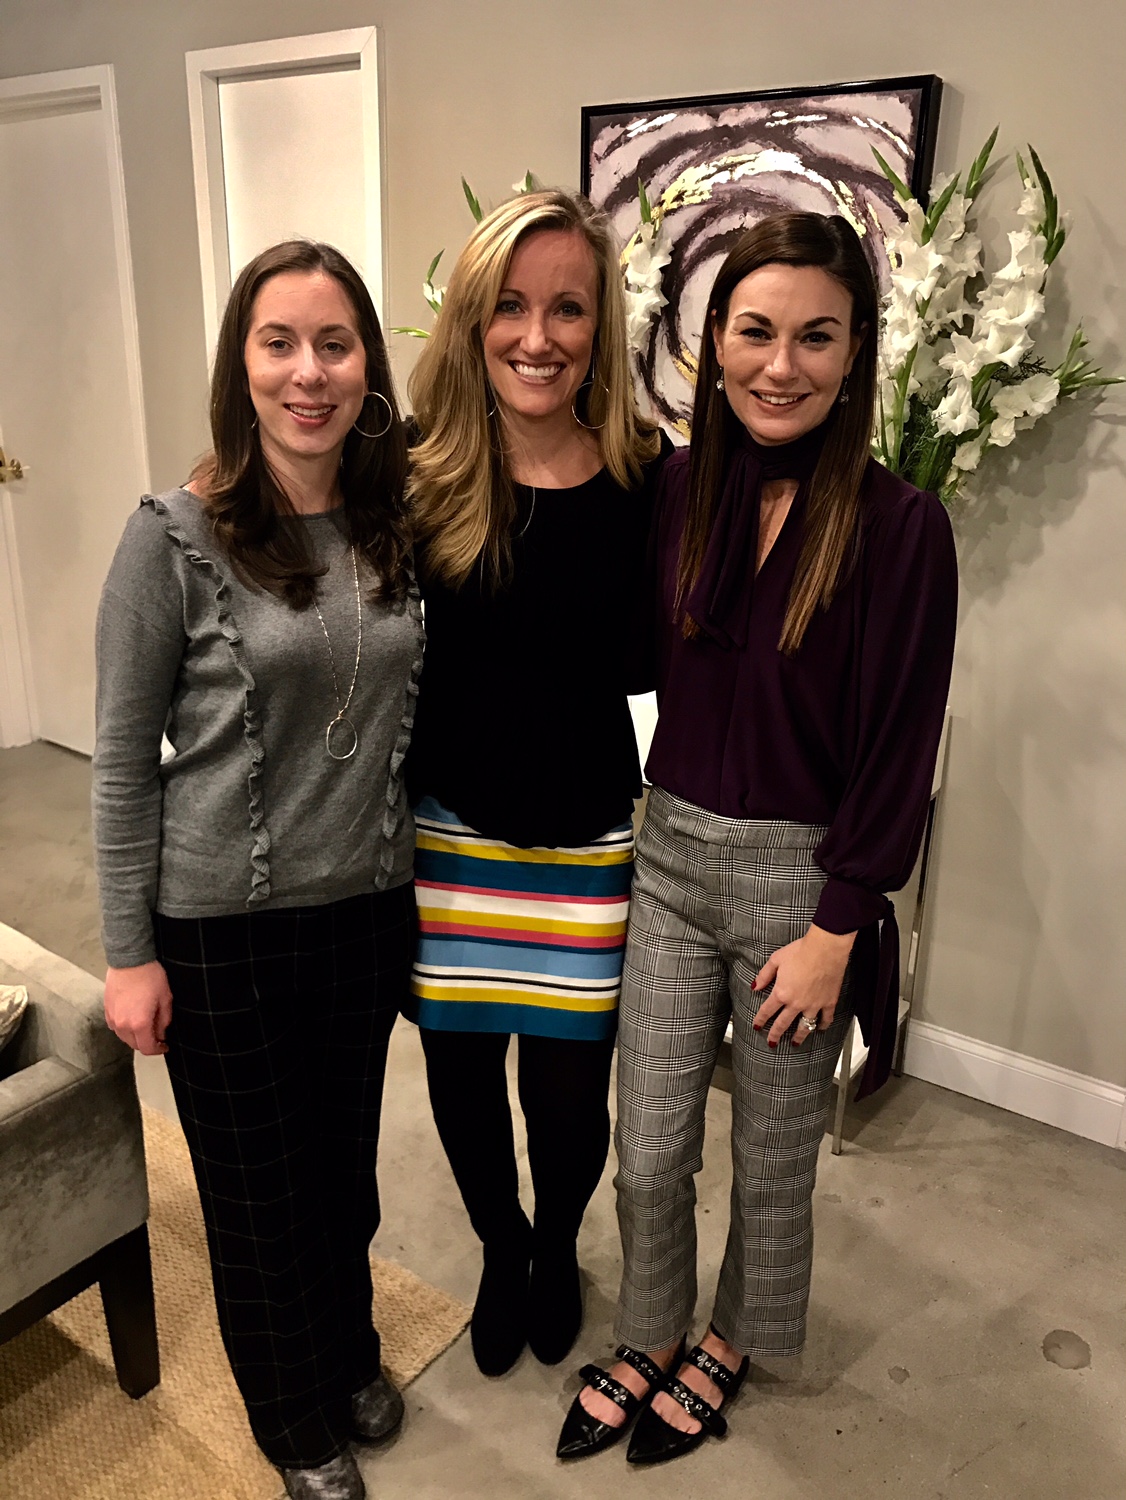 Above: Ashley Hovis, Katherine Shoaf and Jill Harrill at the ITA Young Textile Professionals Showtime event.